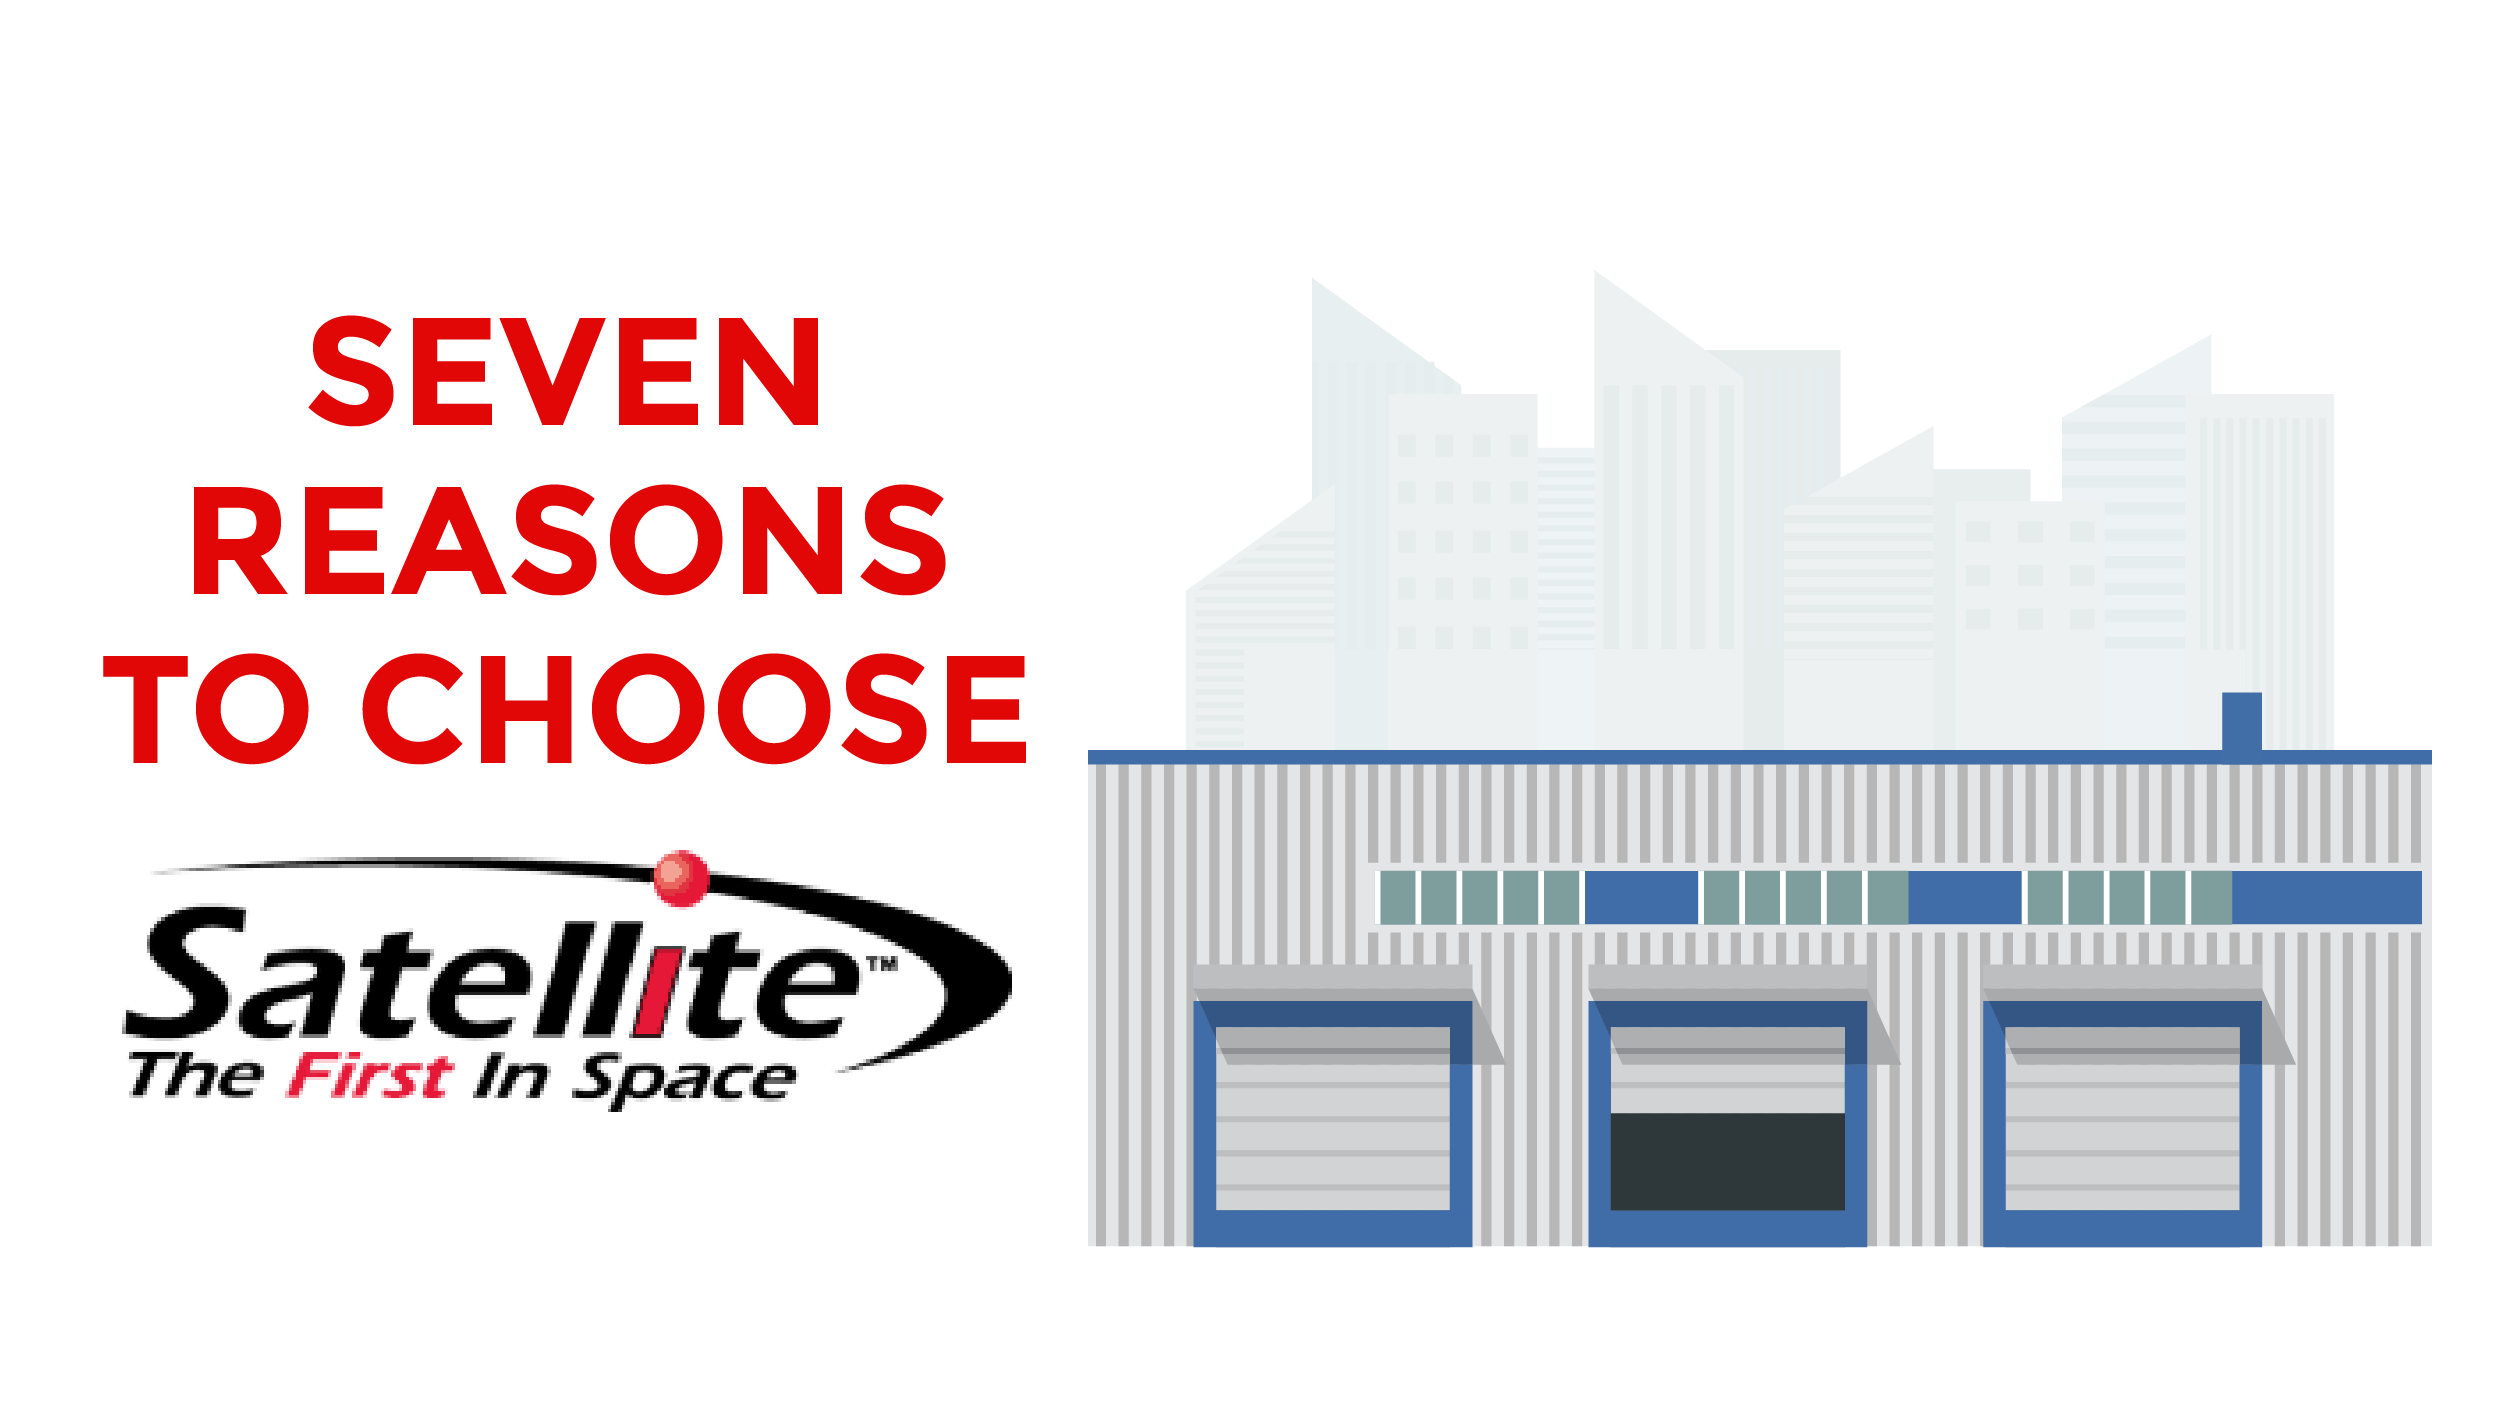 Seven Reasons to Choose Satellite Shelters.